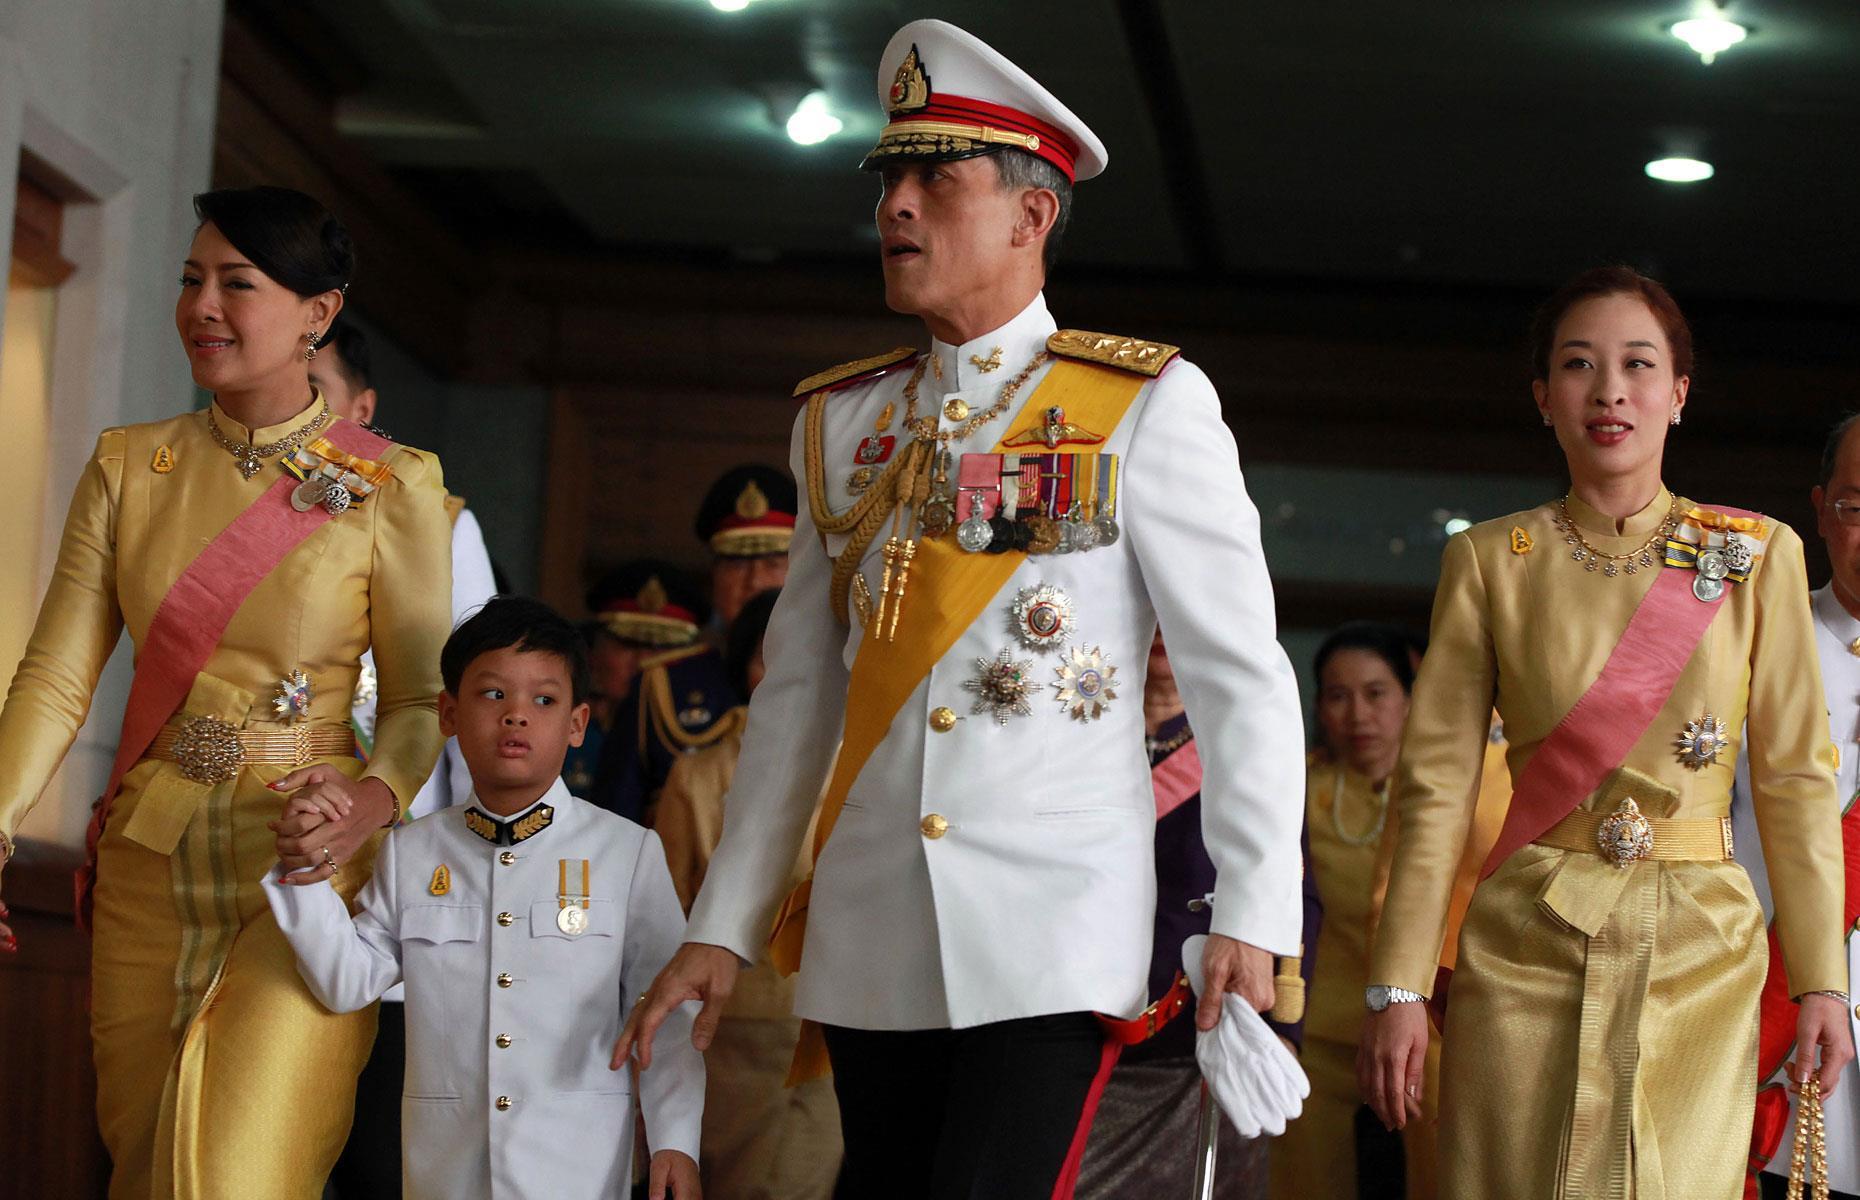 <p>The Chakri dynasty has been Thailand's ruling royal house for more than two centuries and continues to be treated with the utmost reverence in the country.</p>  <p>The current King, Maha Vajiralongkorn, heads the family, which comprises 26 individuals.</p>  <p>Together, the dynasty is thought to control around $60 billion in assets through the Crown Property Bureau, including extensive tracts of valuable real estate in central Bangkok, and owns a multitude of shares in luxury hotel group Kempinski.</p>